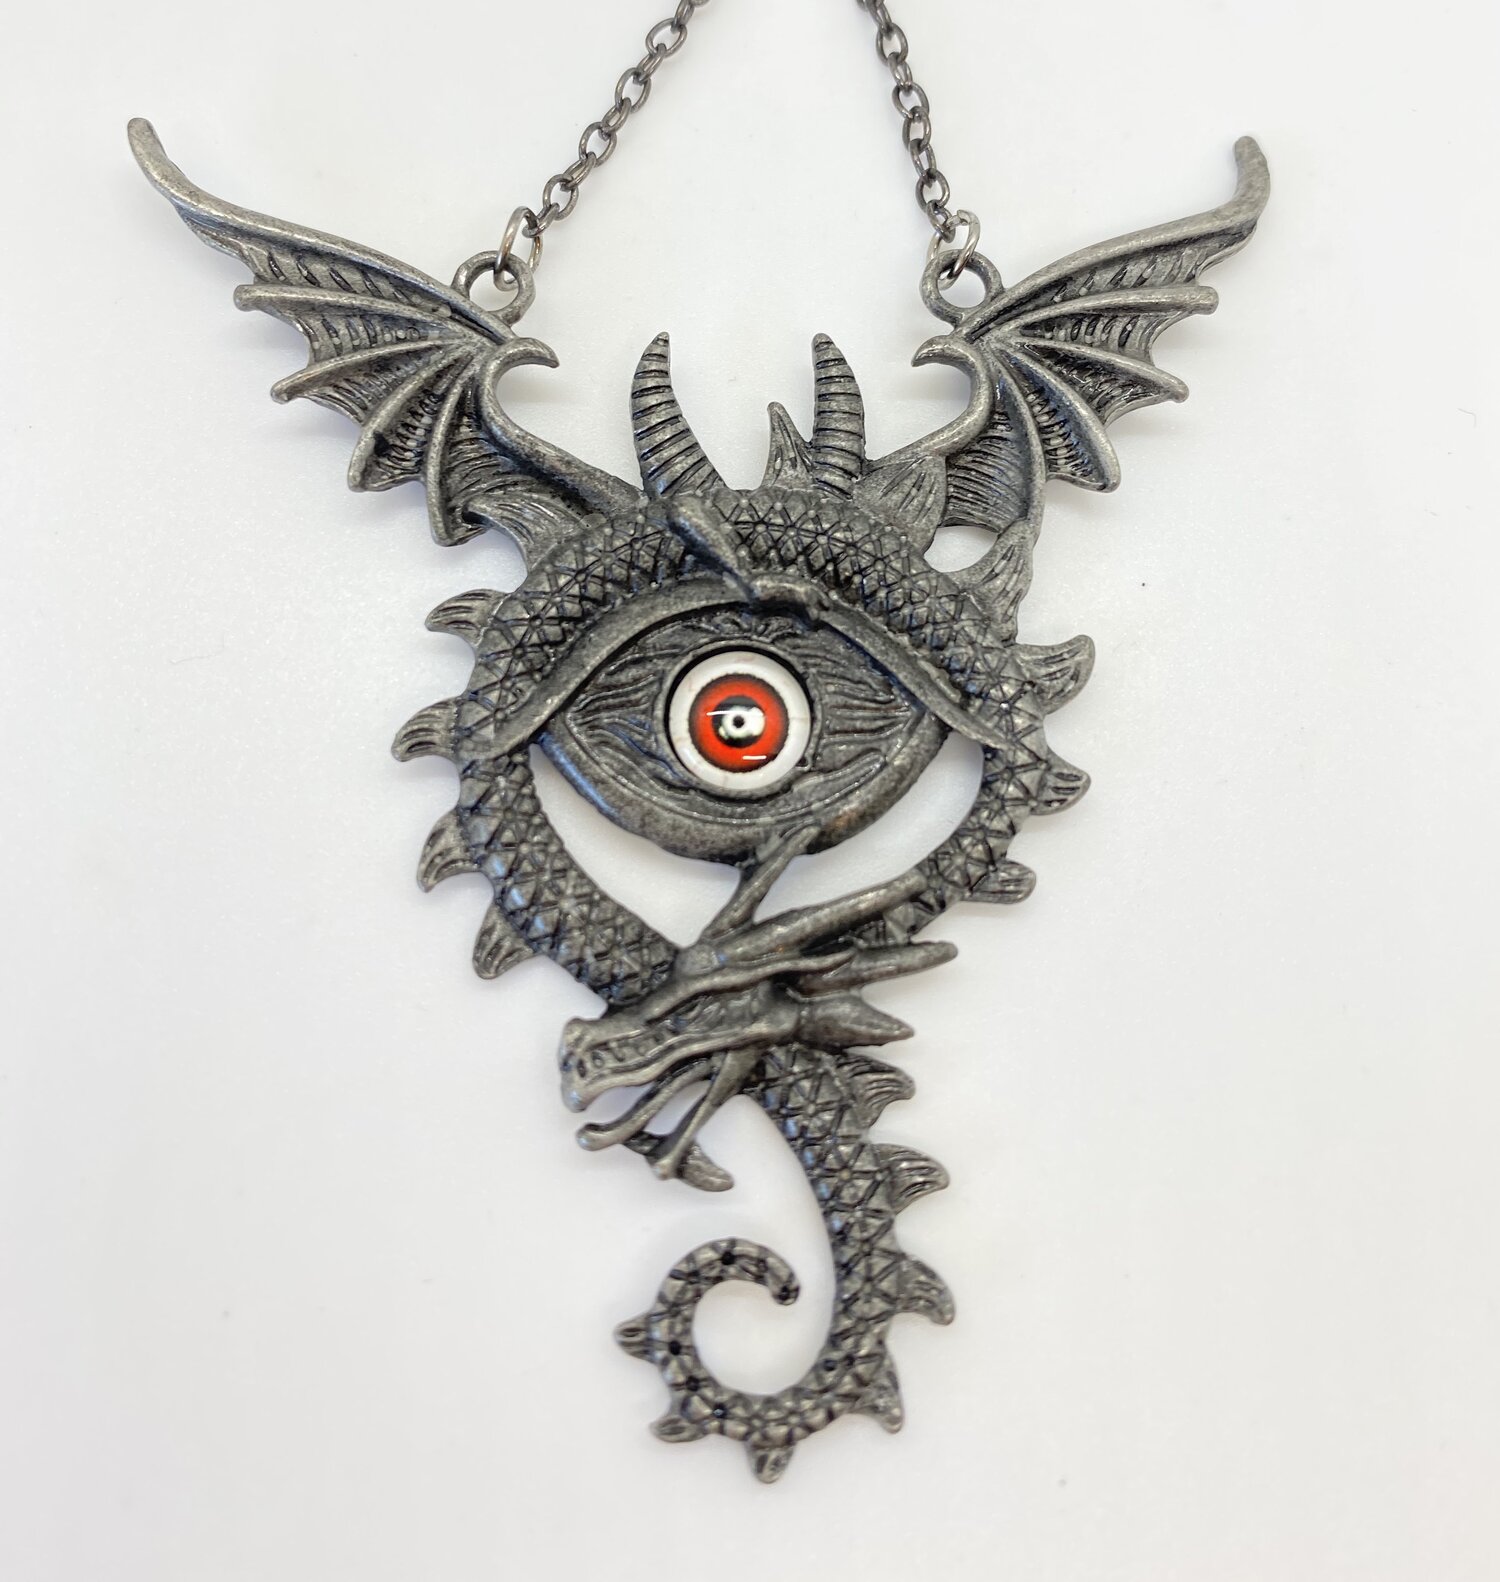 Pendant Winged Dragon with an Eye